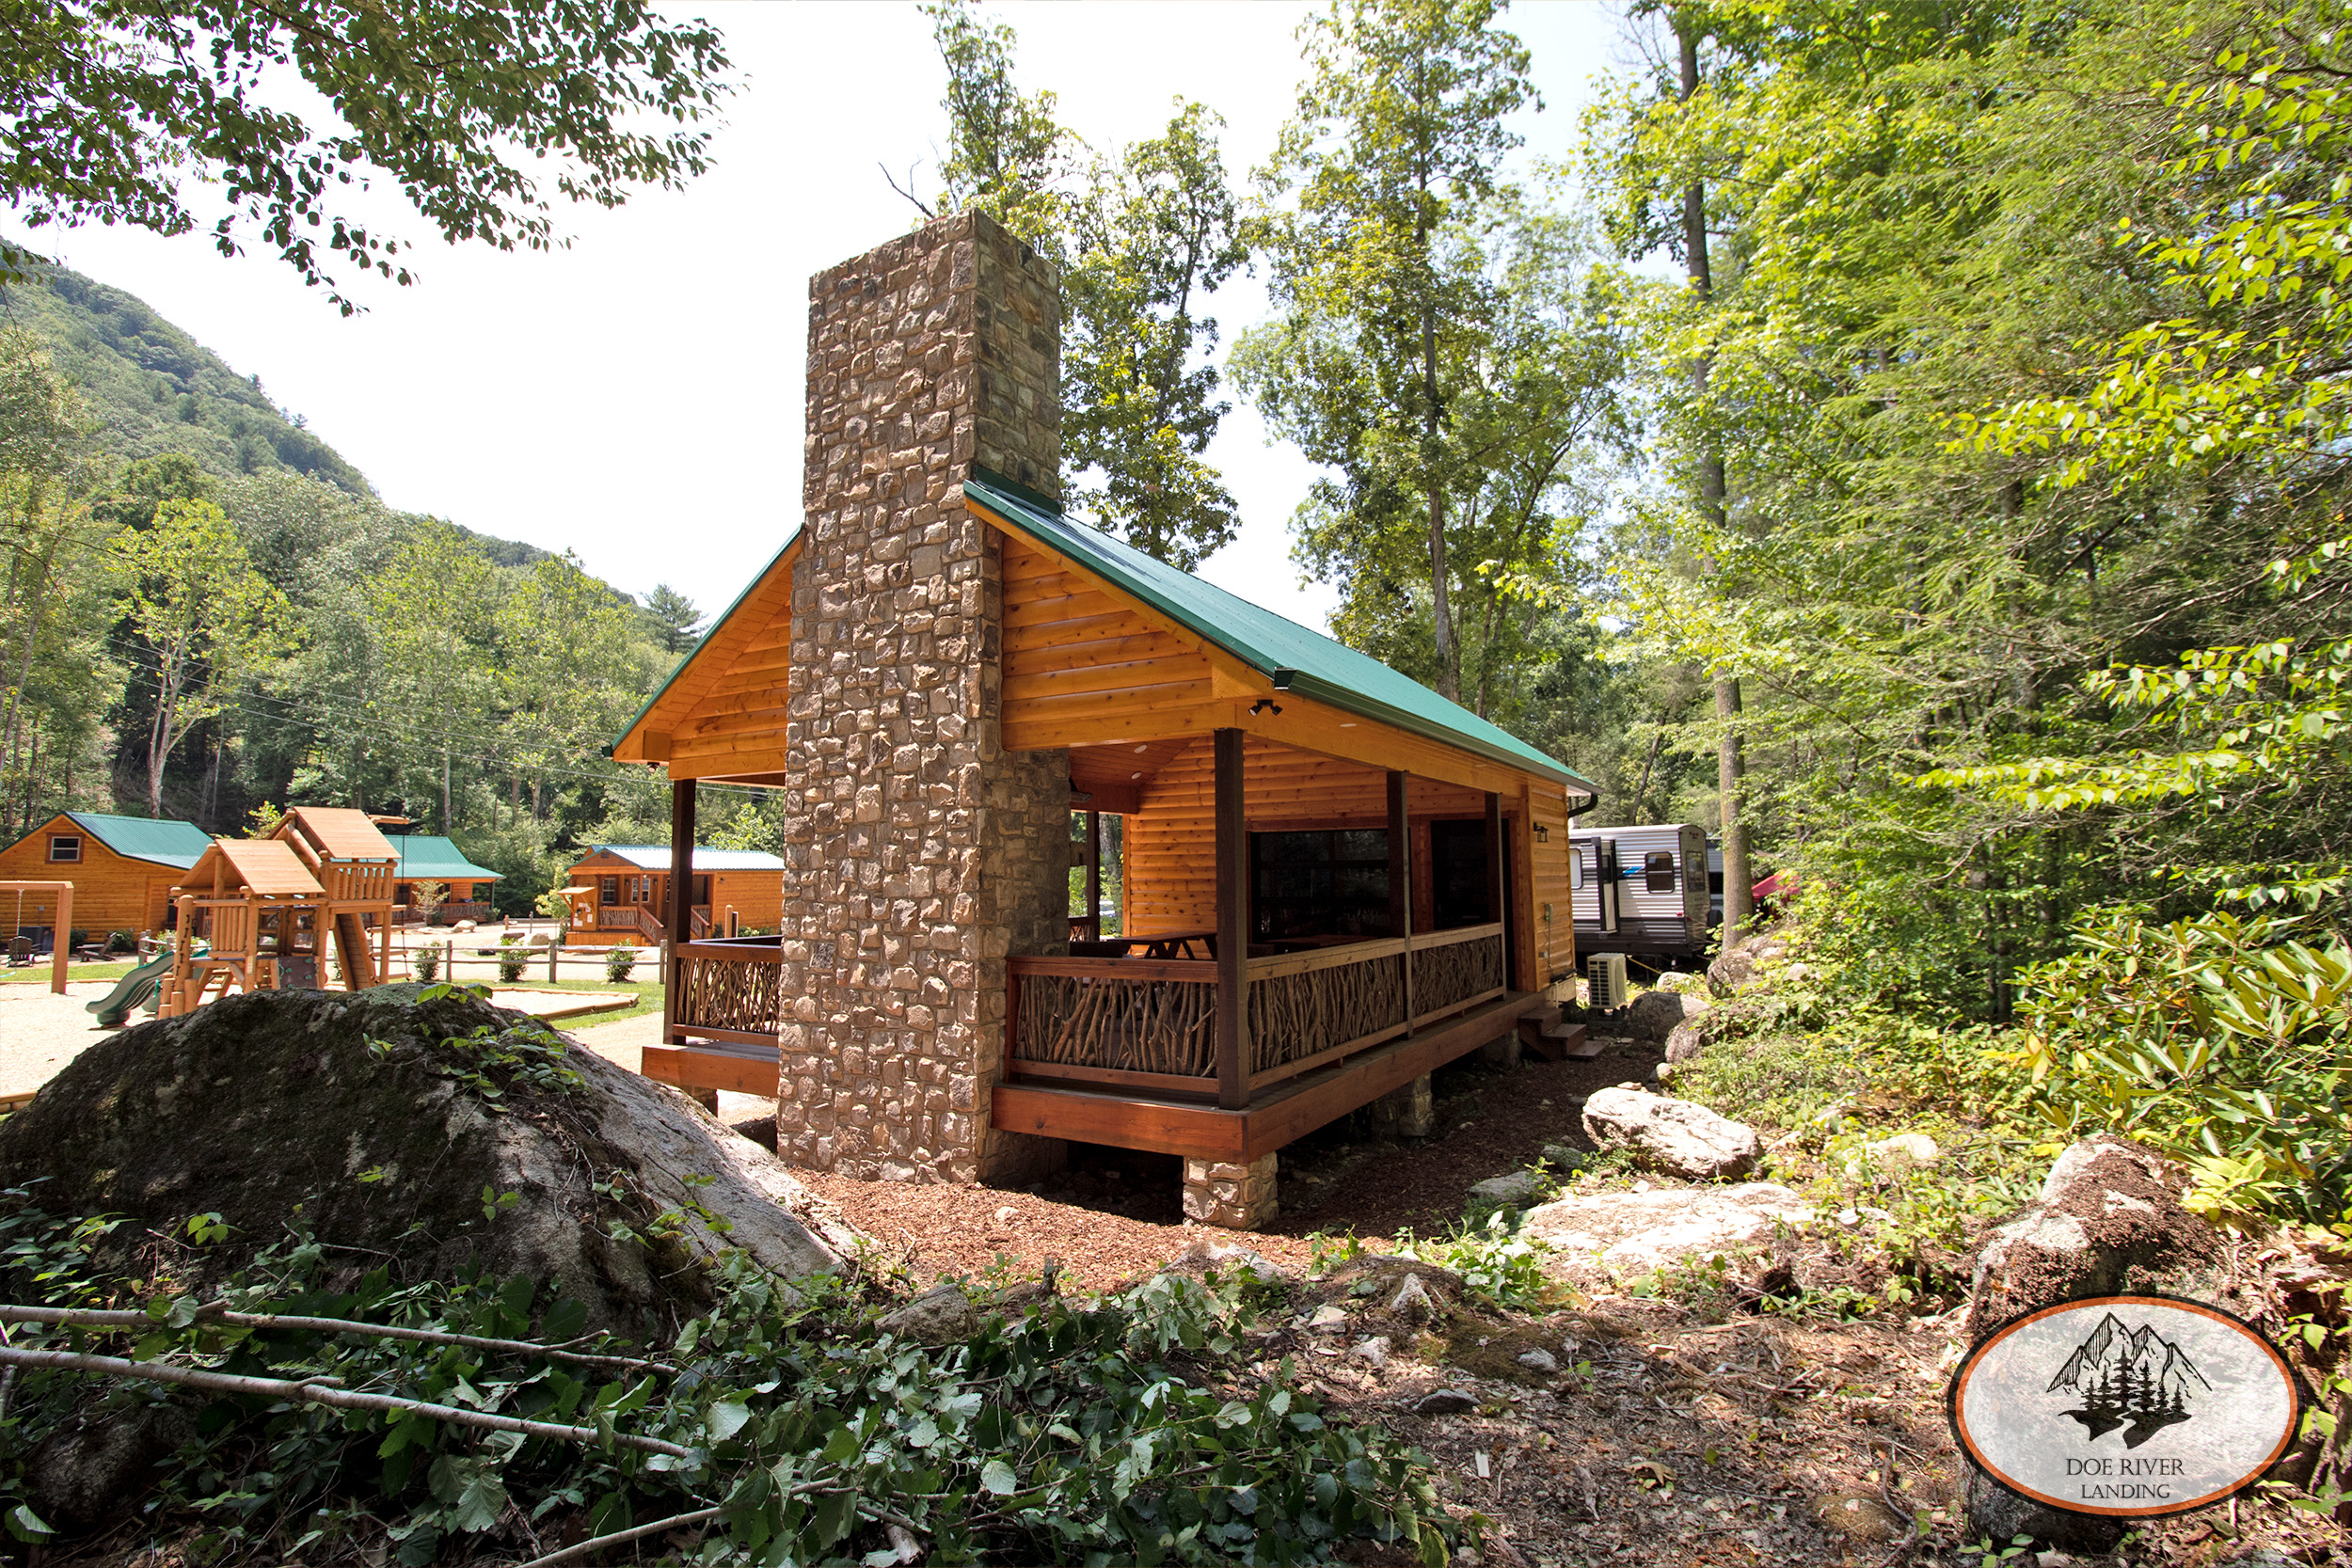 Doe River Landing campground and event venue in Roan Mountain, TN. Best vacation rental and event space near Elizabethton, TN and Johnson City TN. The Water's Edge Pavilion is the perfect riverfront venue for birthday parties, ceremonies, reunions, showers, retirement, graduation, and more.